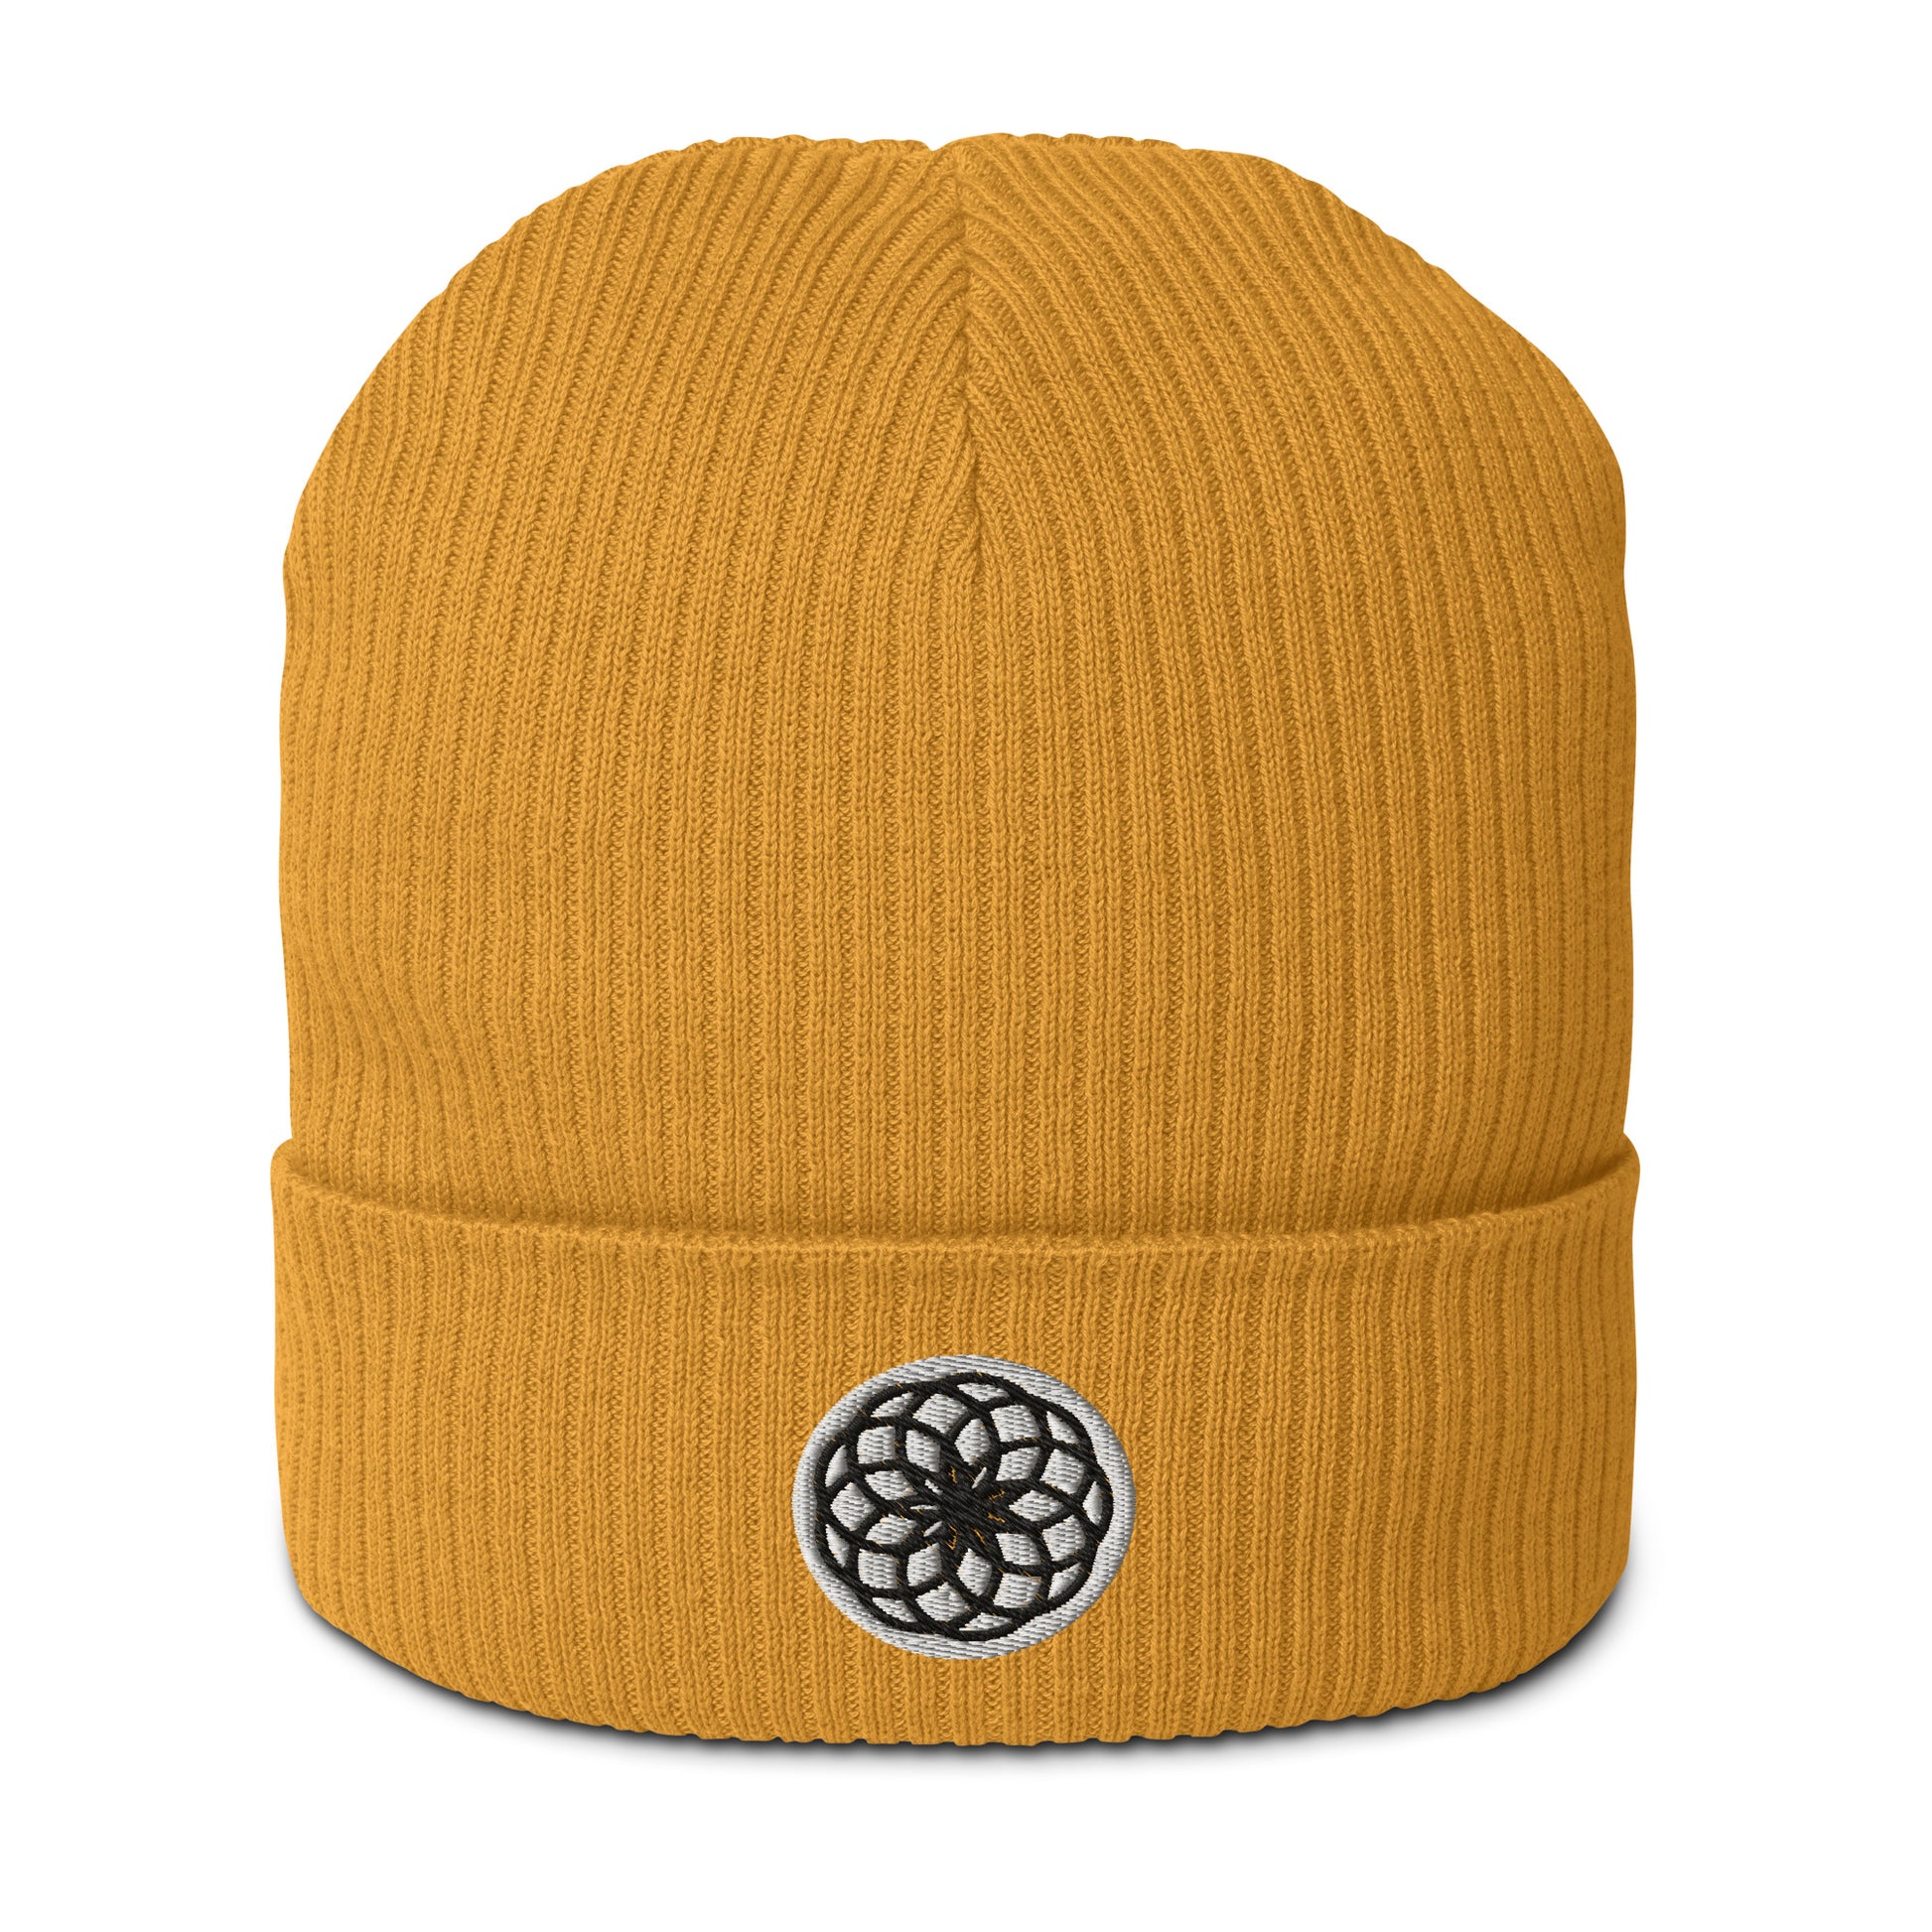 Check out our Organic Cotton Lotus of Life Beanie in Mustard Yellow. Made from organic cotton and featuring a Lotus of Life embroidery, it's not your average hat. It's about purity, growth, and embracing life. Plus, it's made of breathable and lightweight natural fabric, so you can stay comfy wherever your journey takes you. Grab one and add a laid-back, high vibe touch to your style.